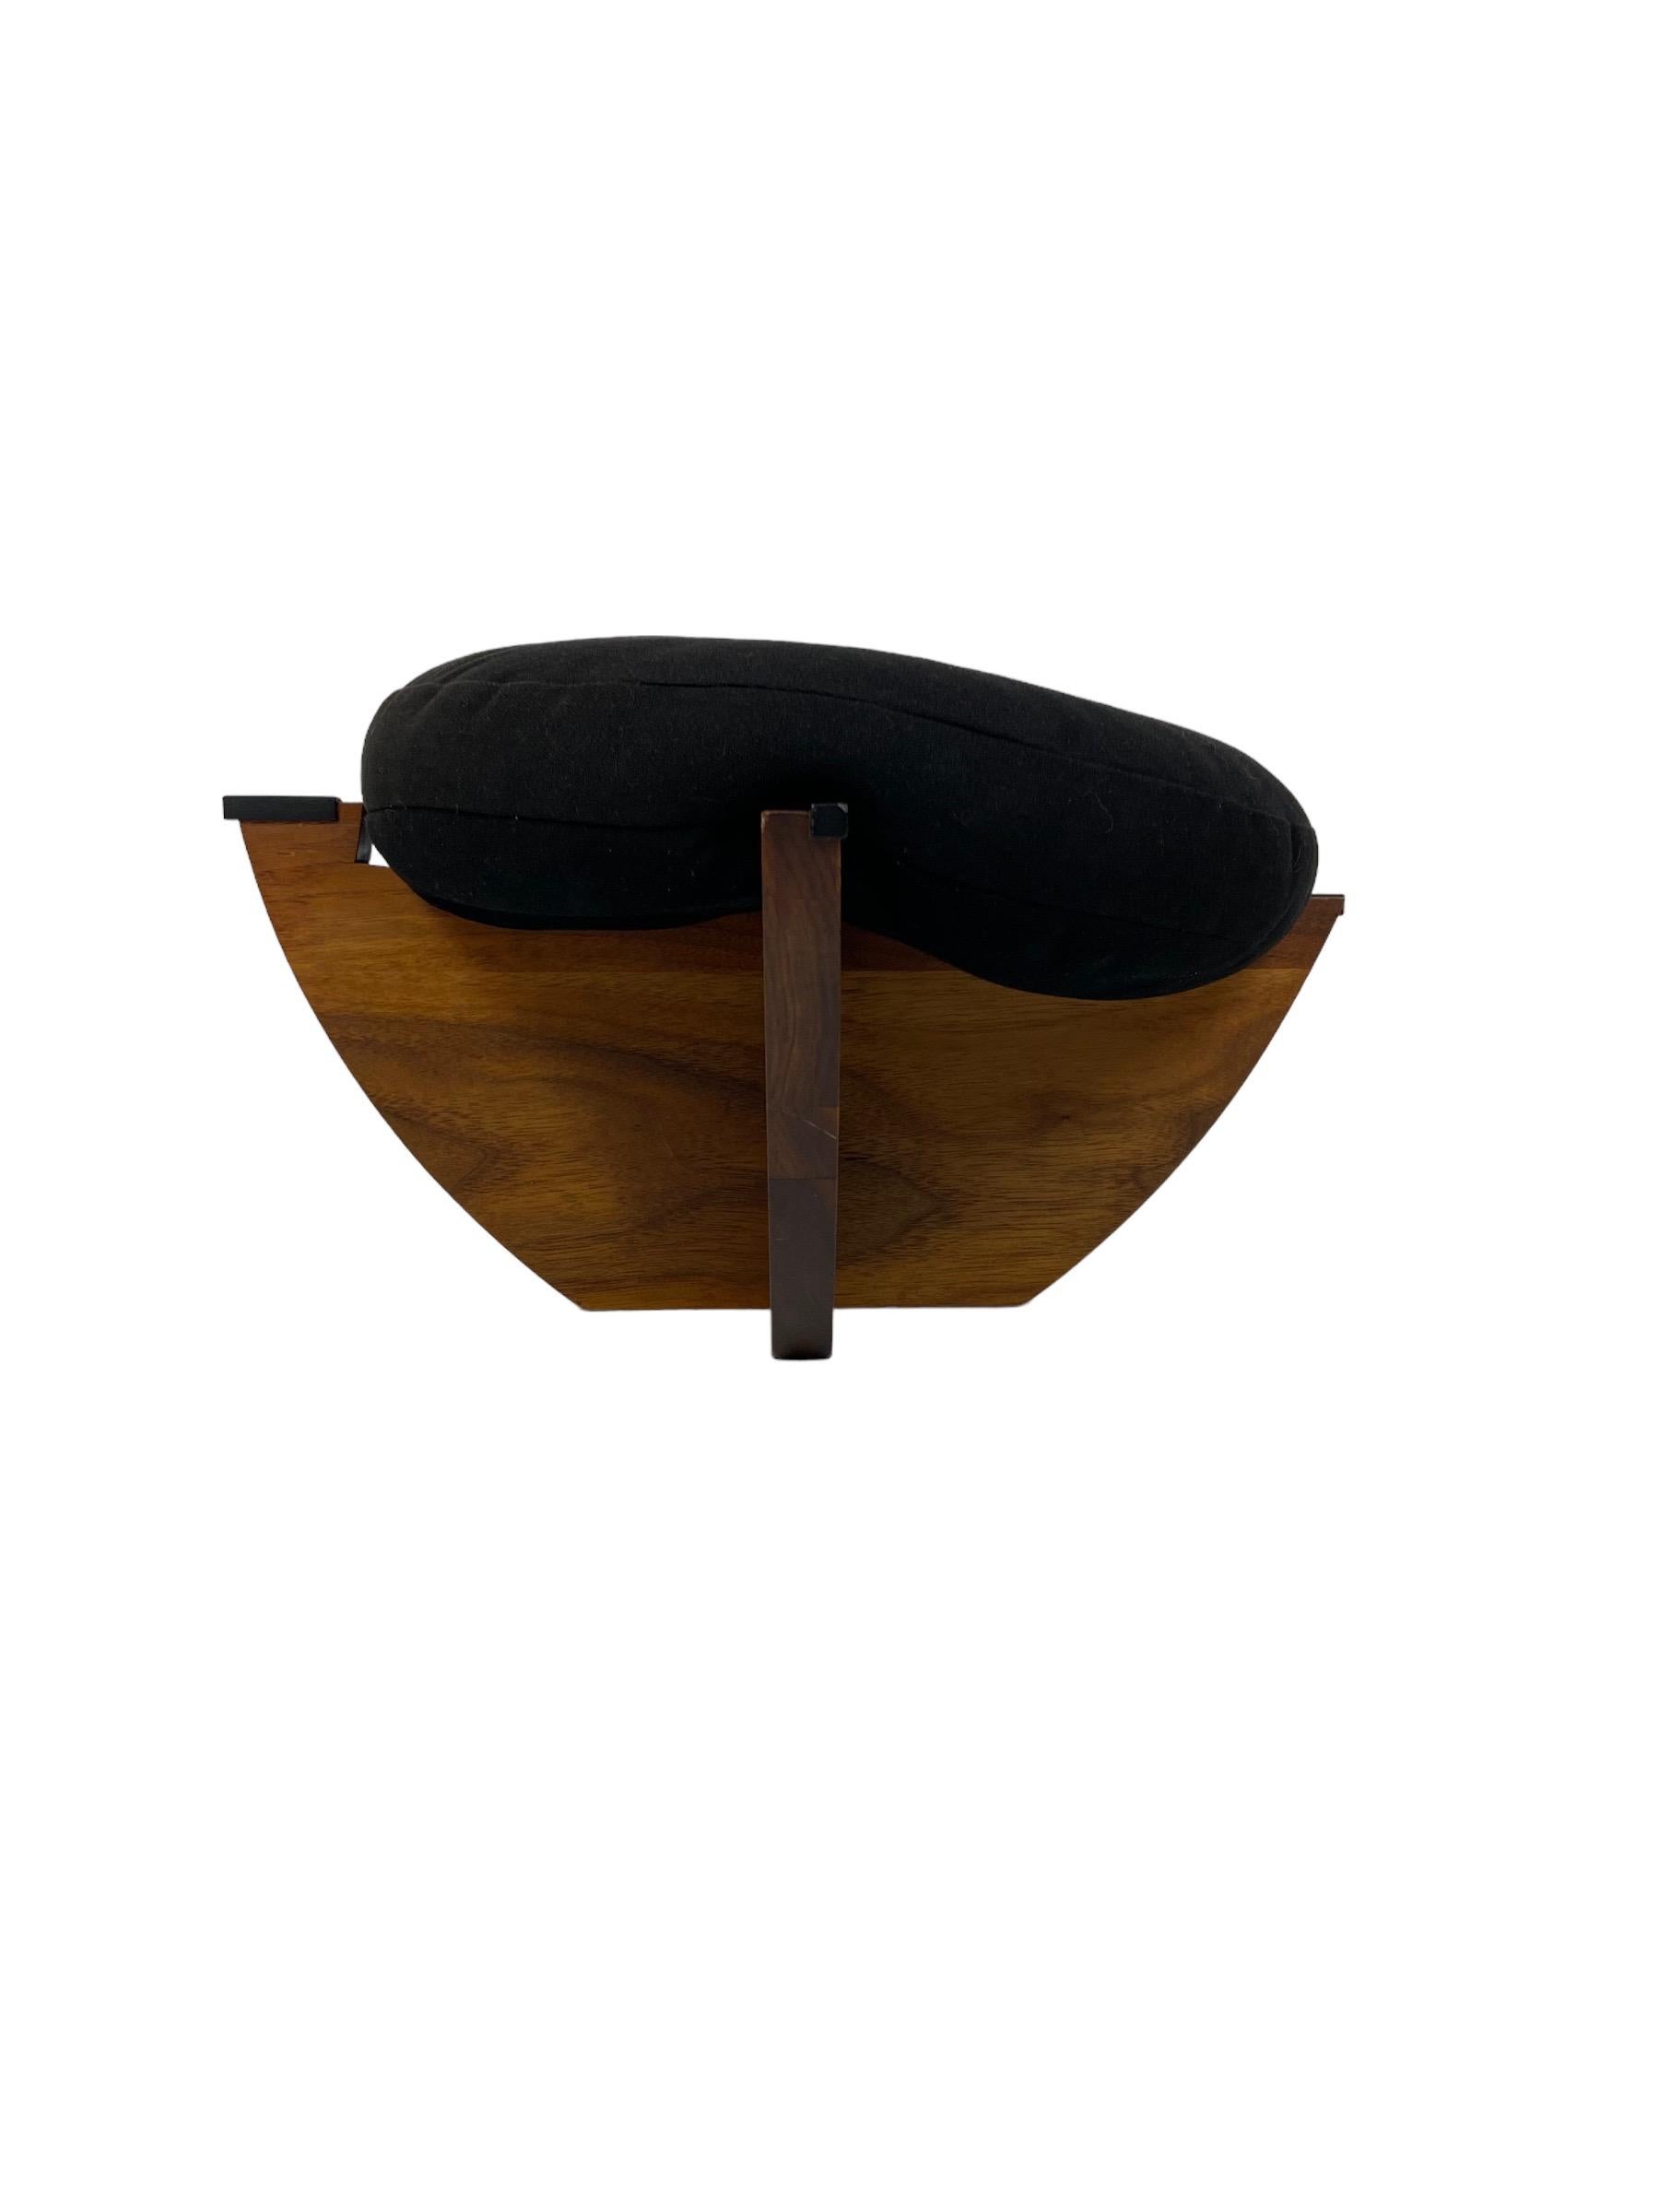 Meditation Stool “Haagse School” In Good Condition For Sale In LELYSTAD, FL